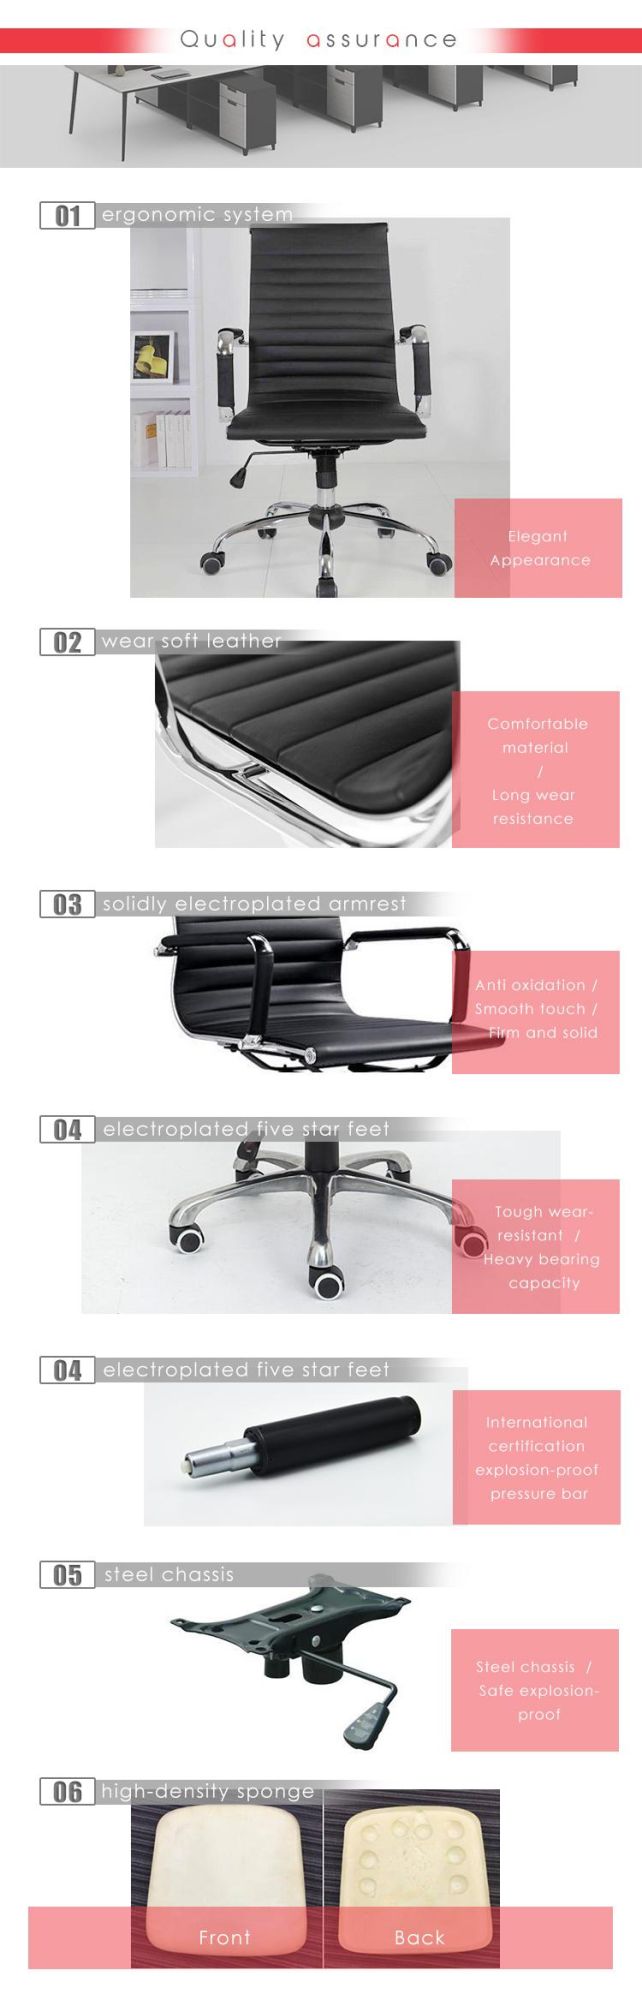 High Quality China Factory Supply Office Chair for UK Market